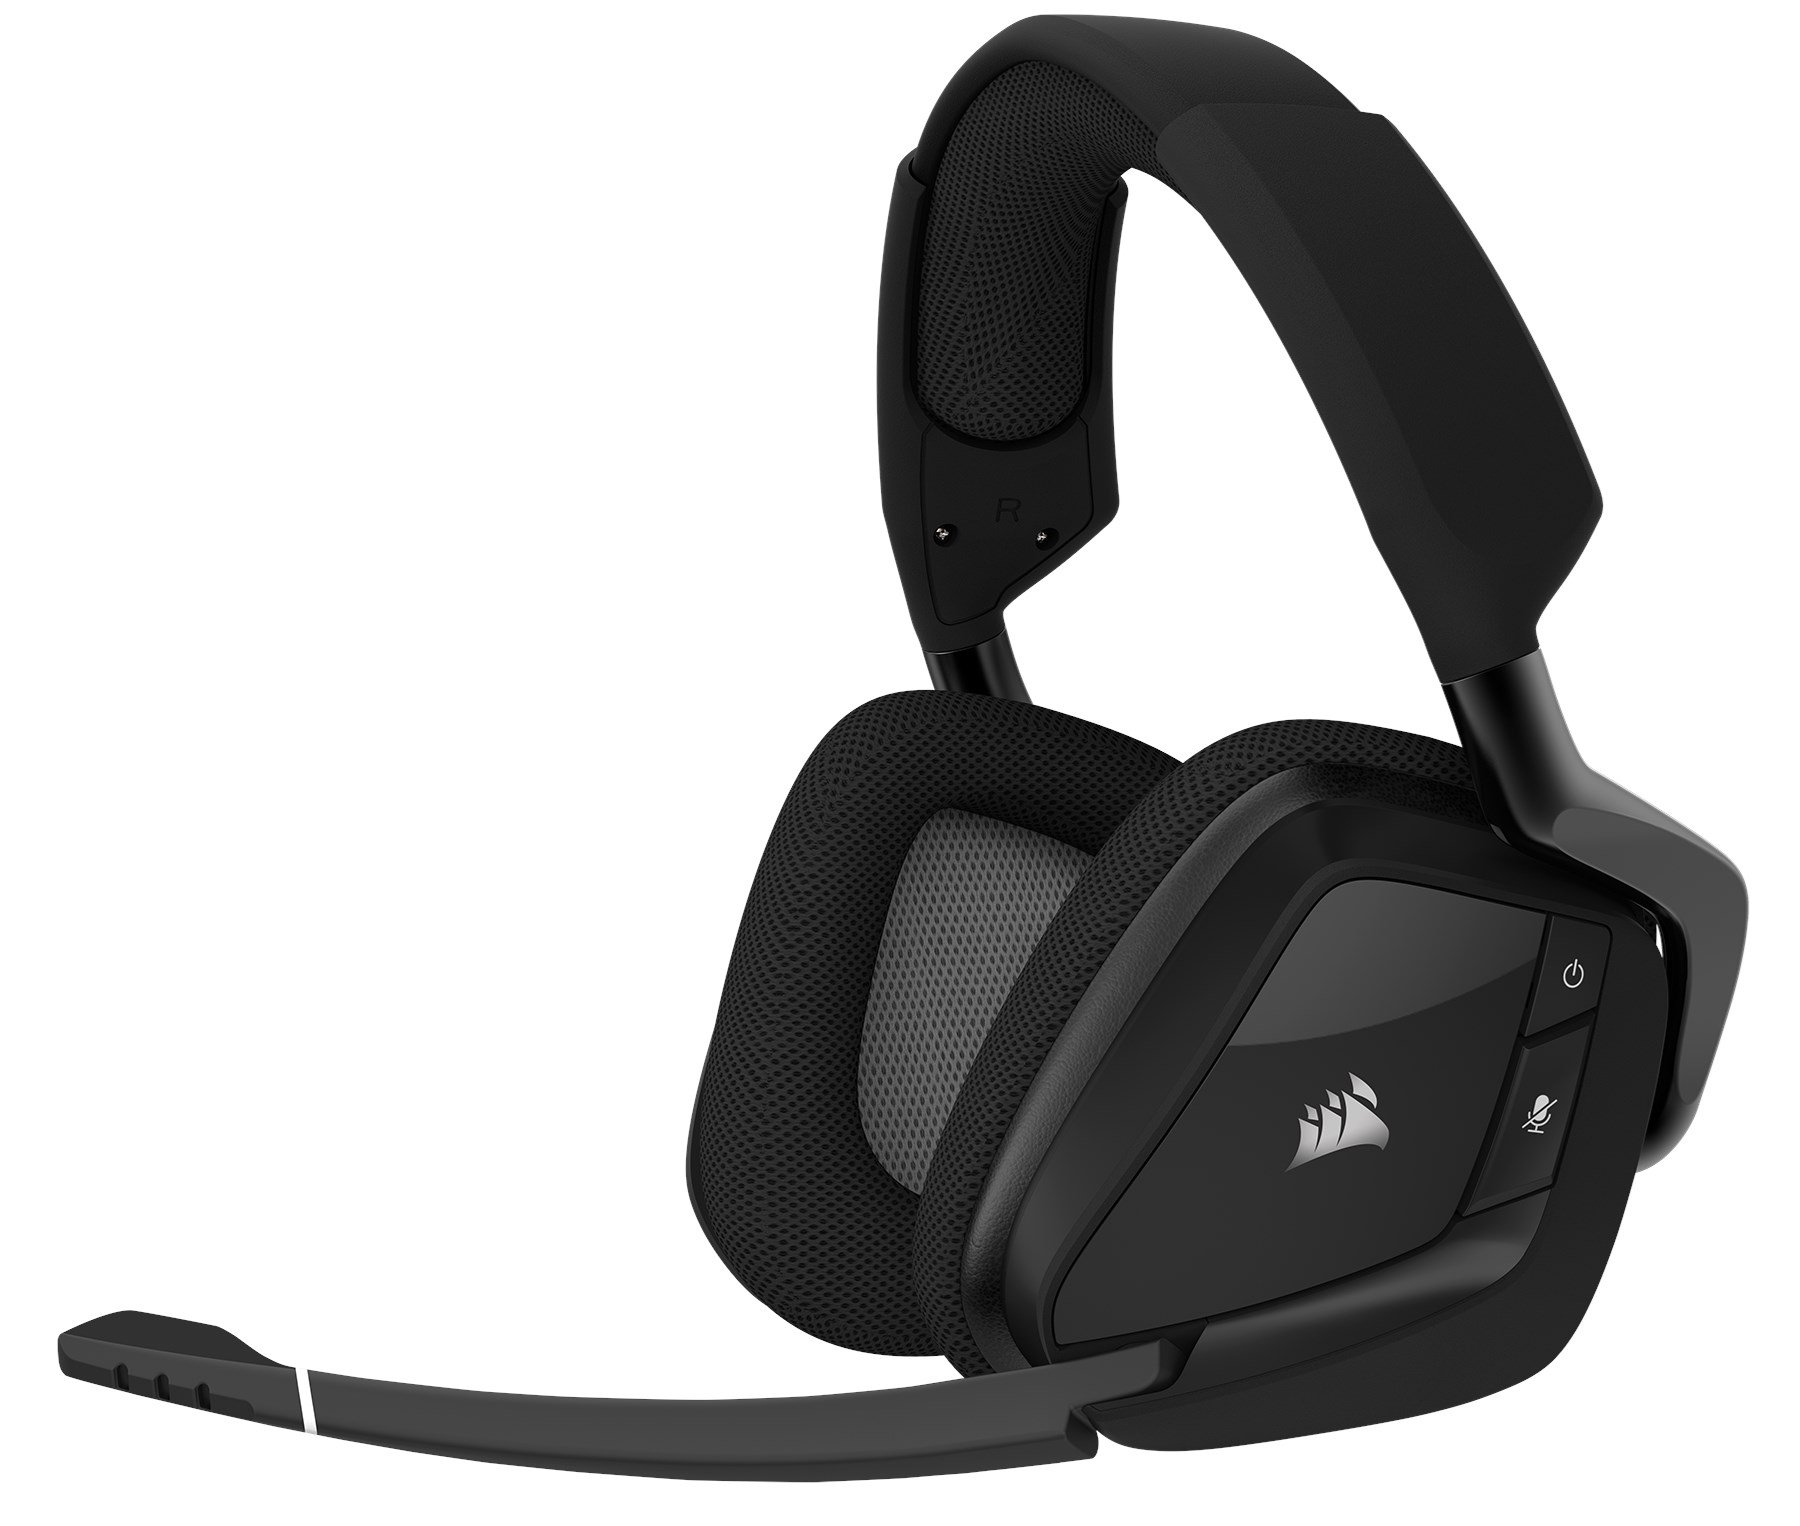 Corsair Void Pro Dolby 7.1 RGB Wireless Gaming Headset (Carbon) - CA